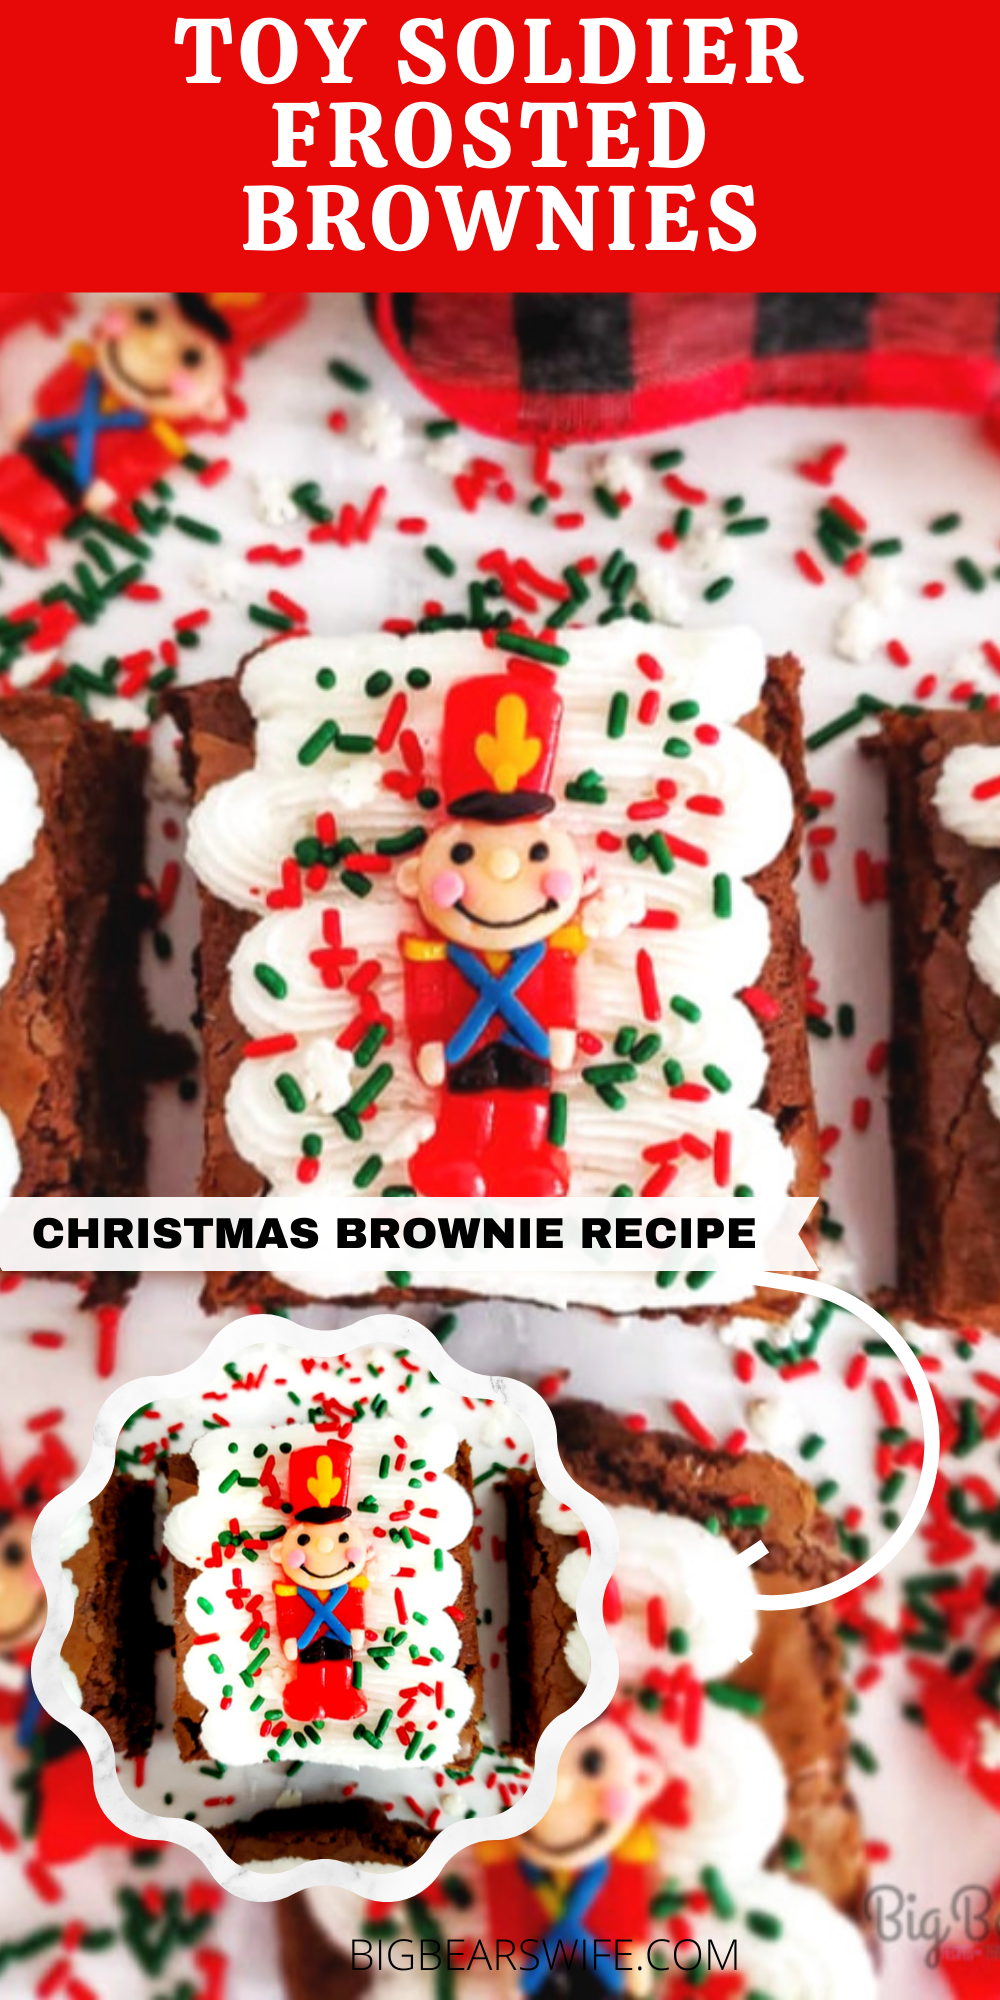 Whip up a festive batch of Holiday brownies with this recipe for Easy Toy Soldier Frosted Brownies! Kids and Adults will both have fun decorating these simple treats! So cute but so quick to toss together!  via @bigbearswife